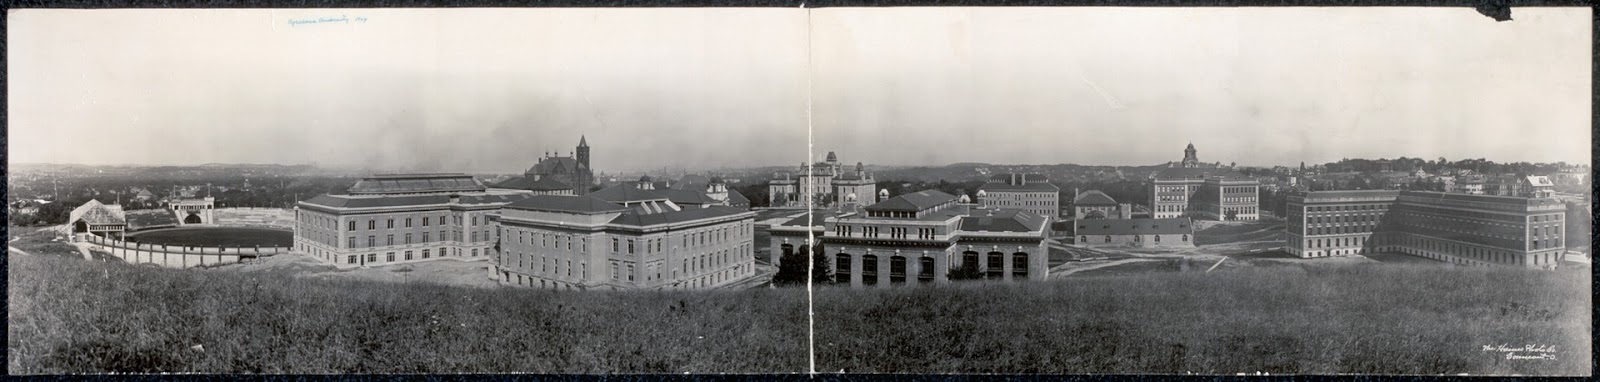 Campus layout in 1909